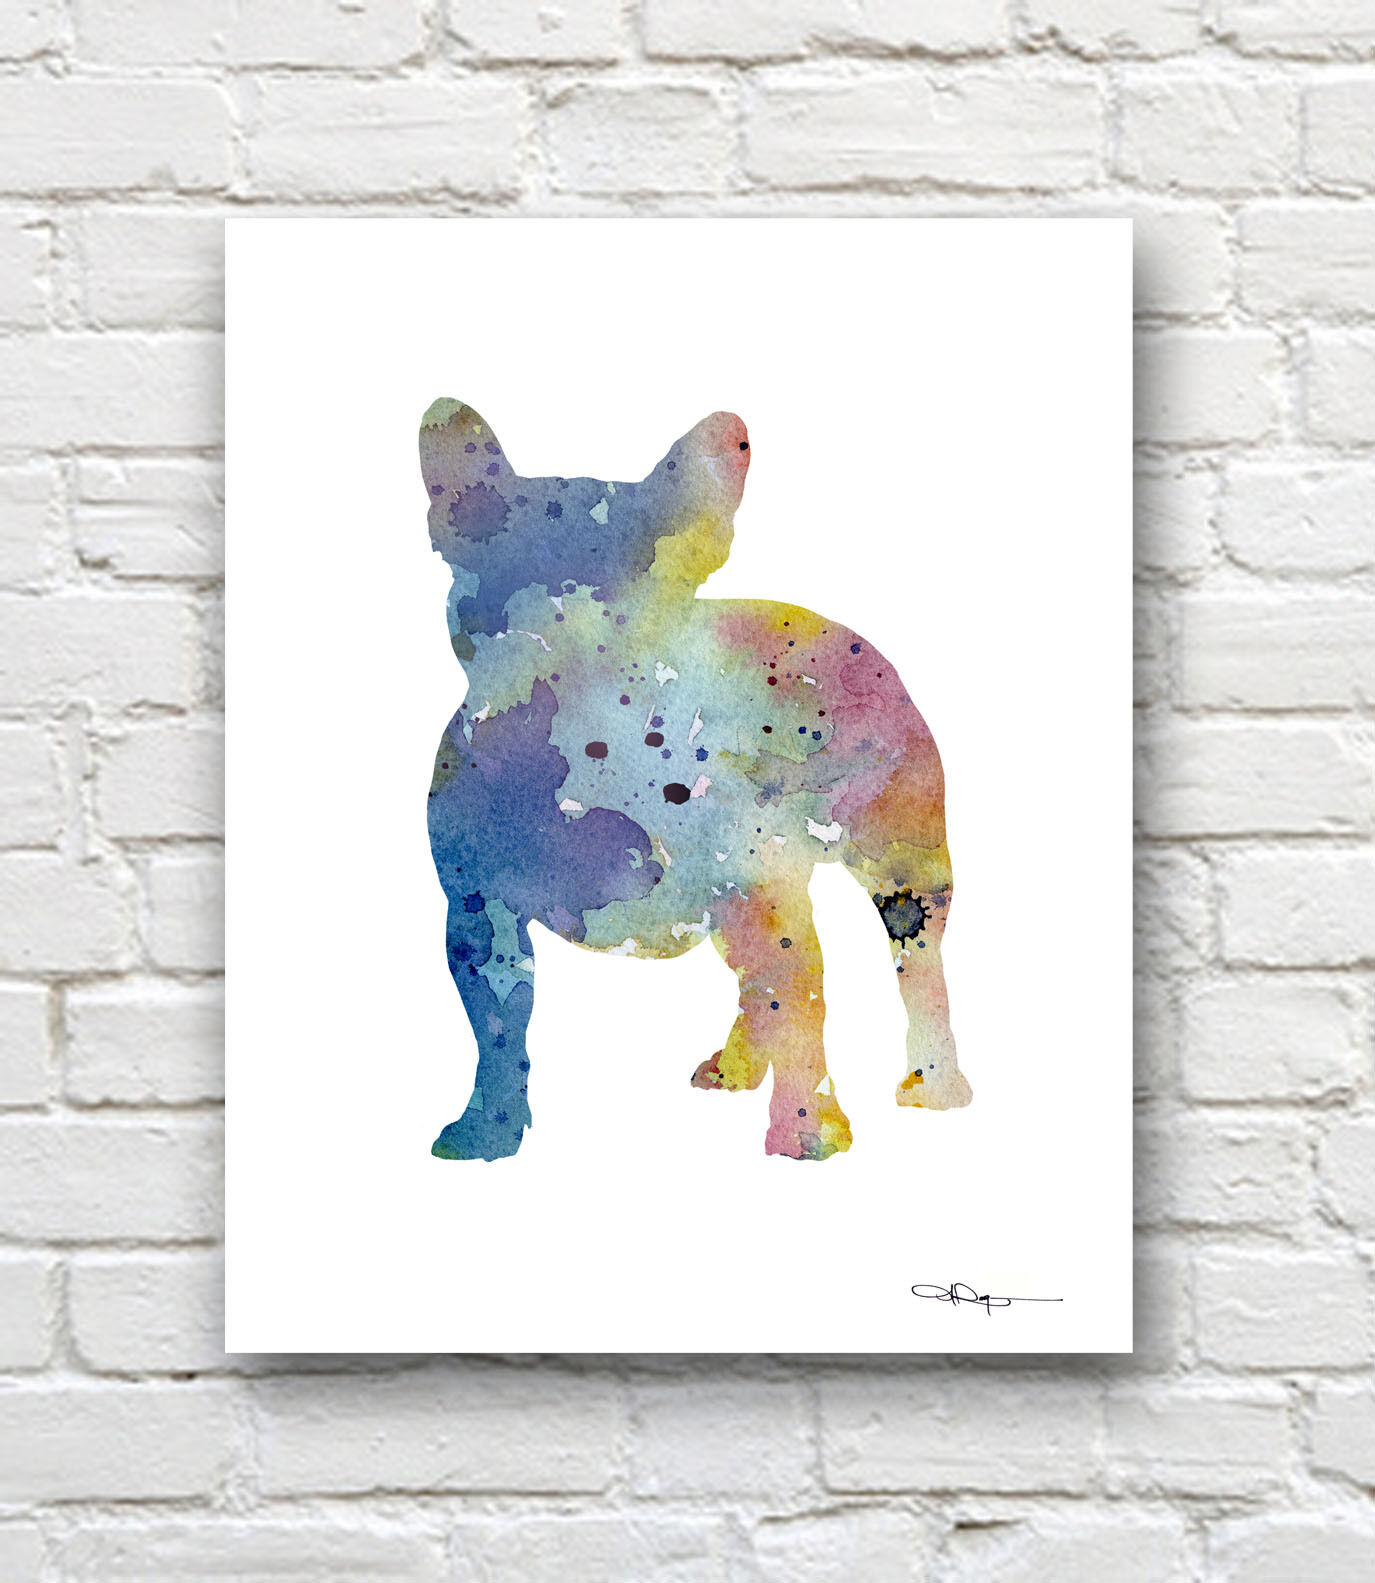 French Bulldog Abstract Watercolor Painting Contemporary Art Print By Artist Djr